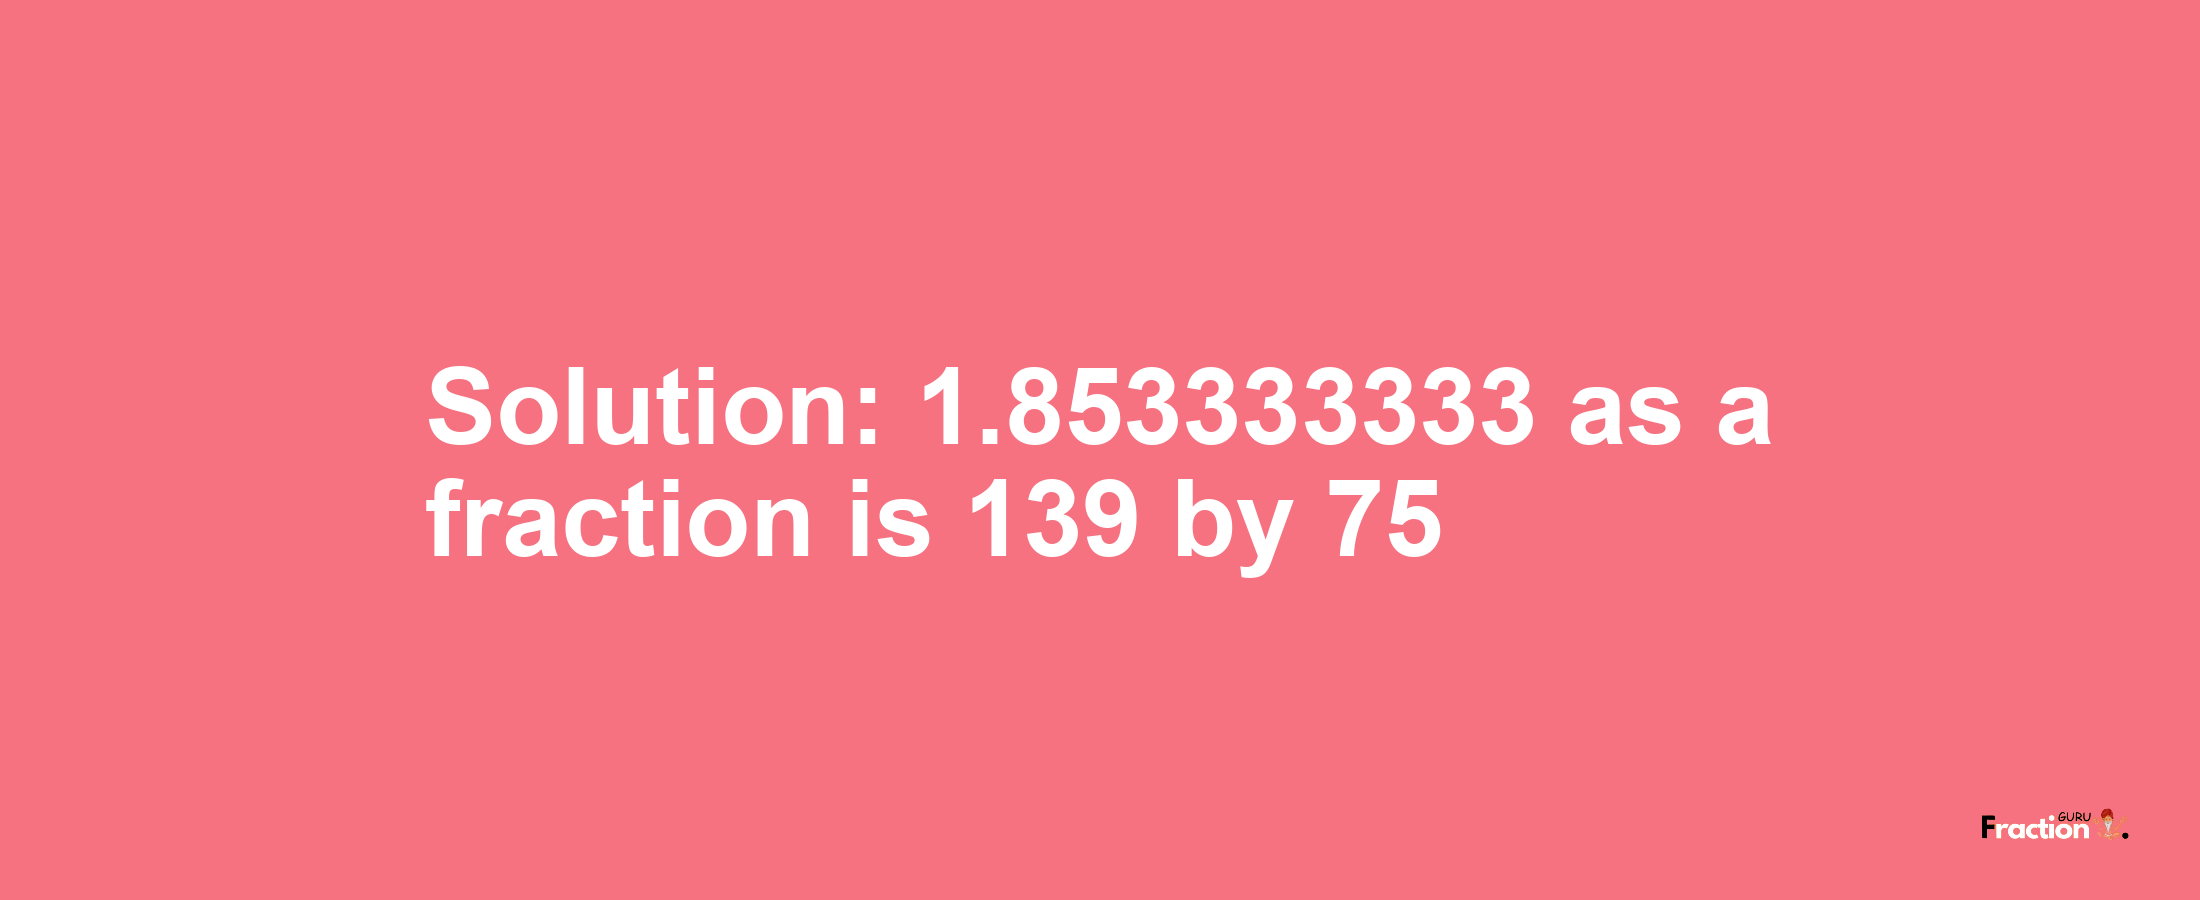 Solution:1.853333333 as a fraction is 139/75